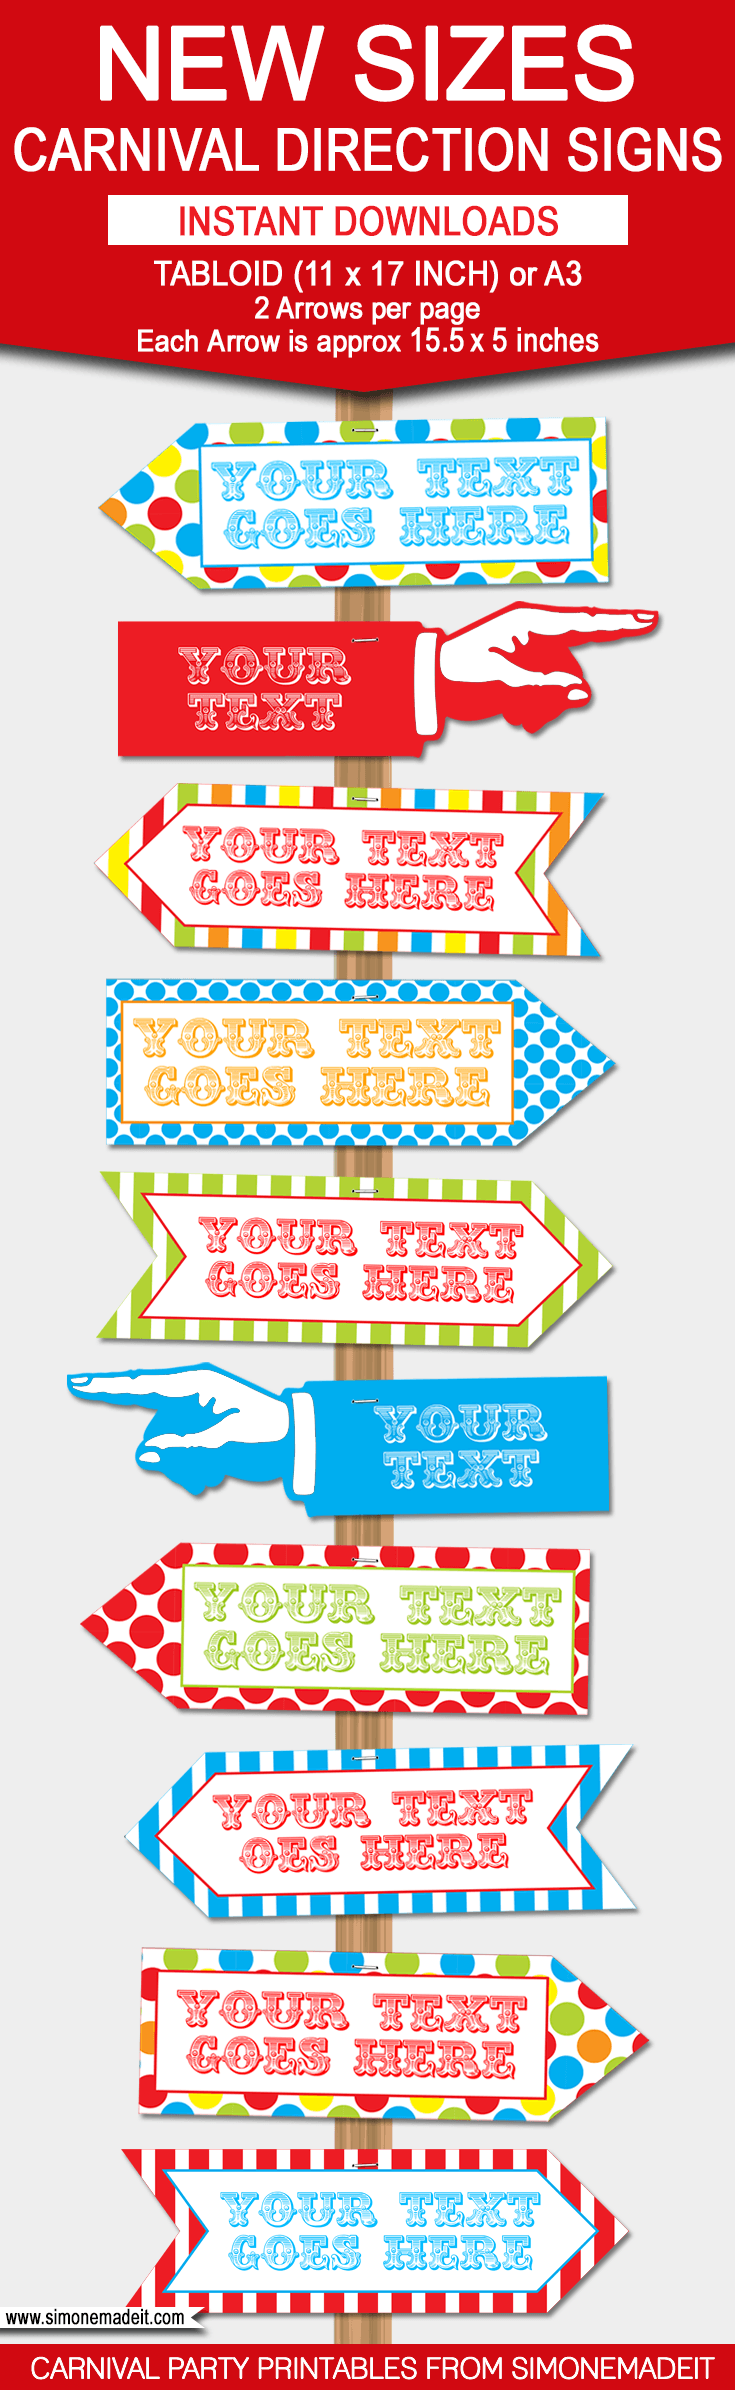 diy-carnival-directional-sign-carnival-party-circus-party